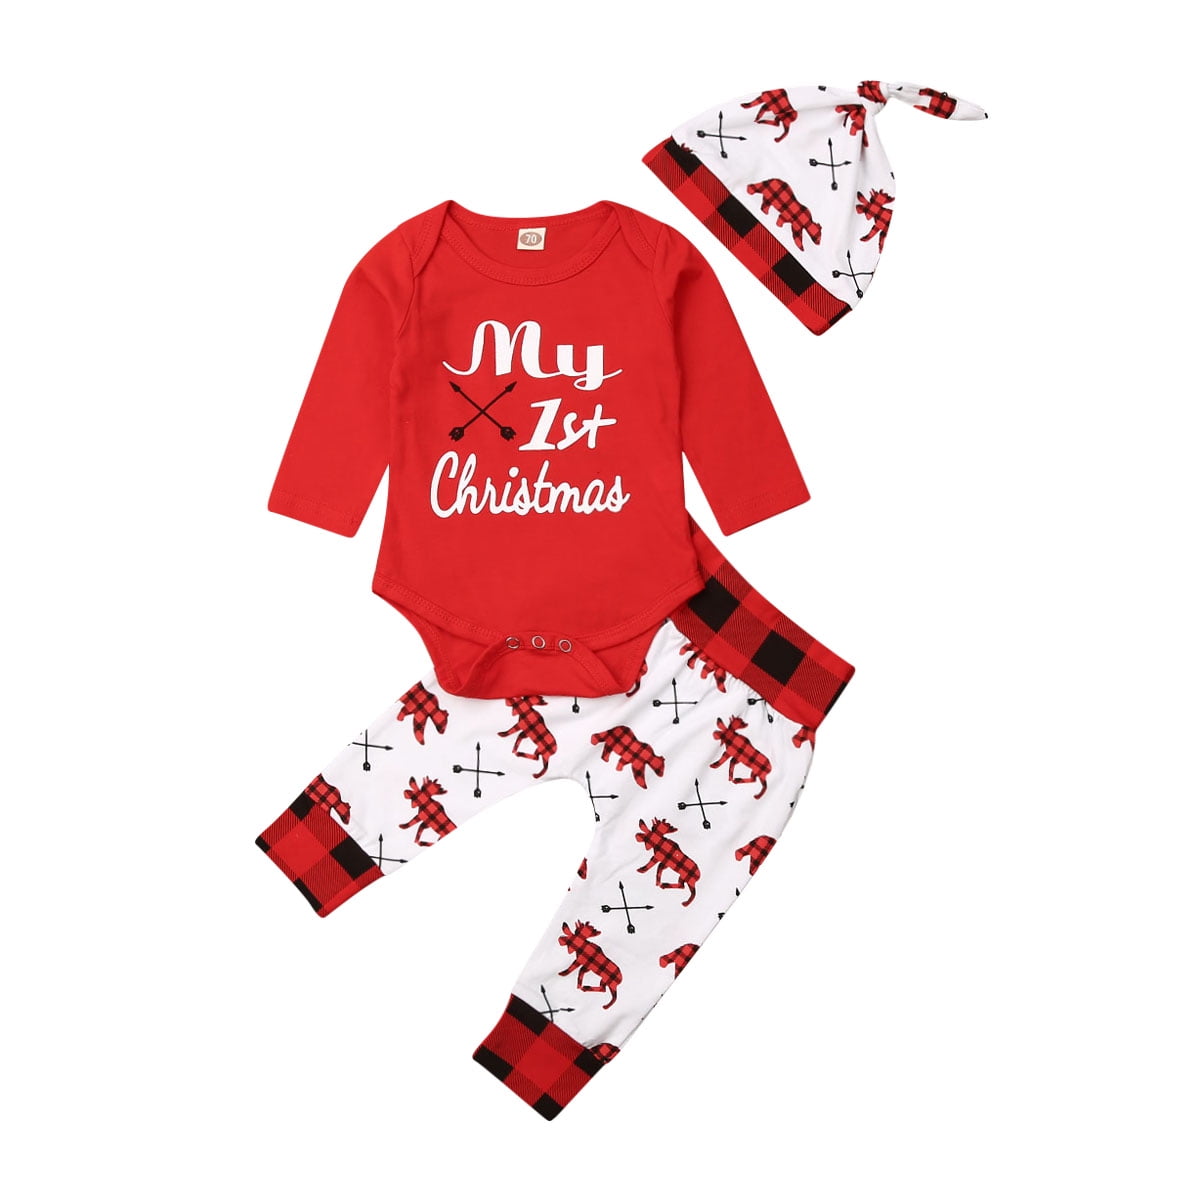 Merqwadd Unisex Infant Baby Christmas Sweater Toddler Reindeer Knit Jumpsuit Outfit